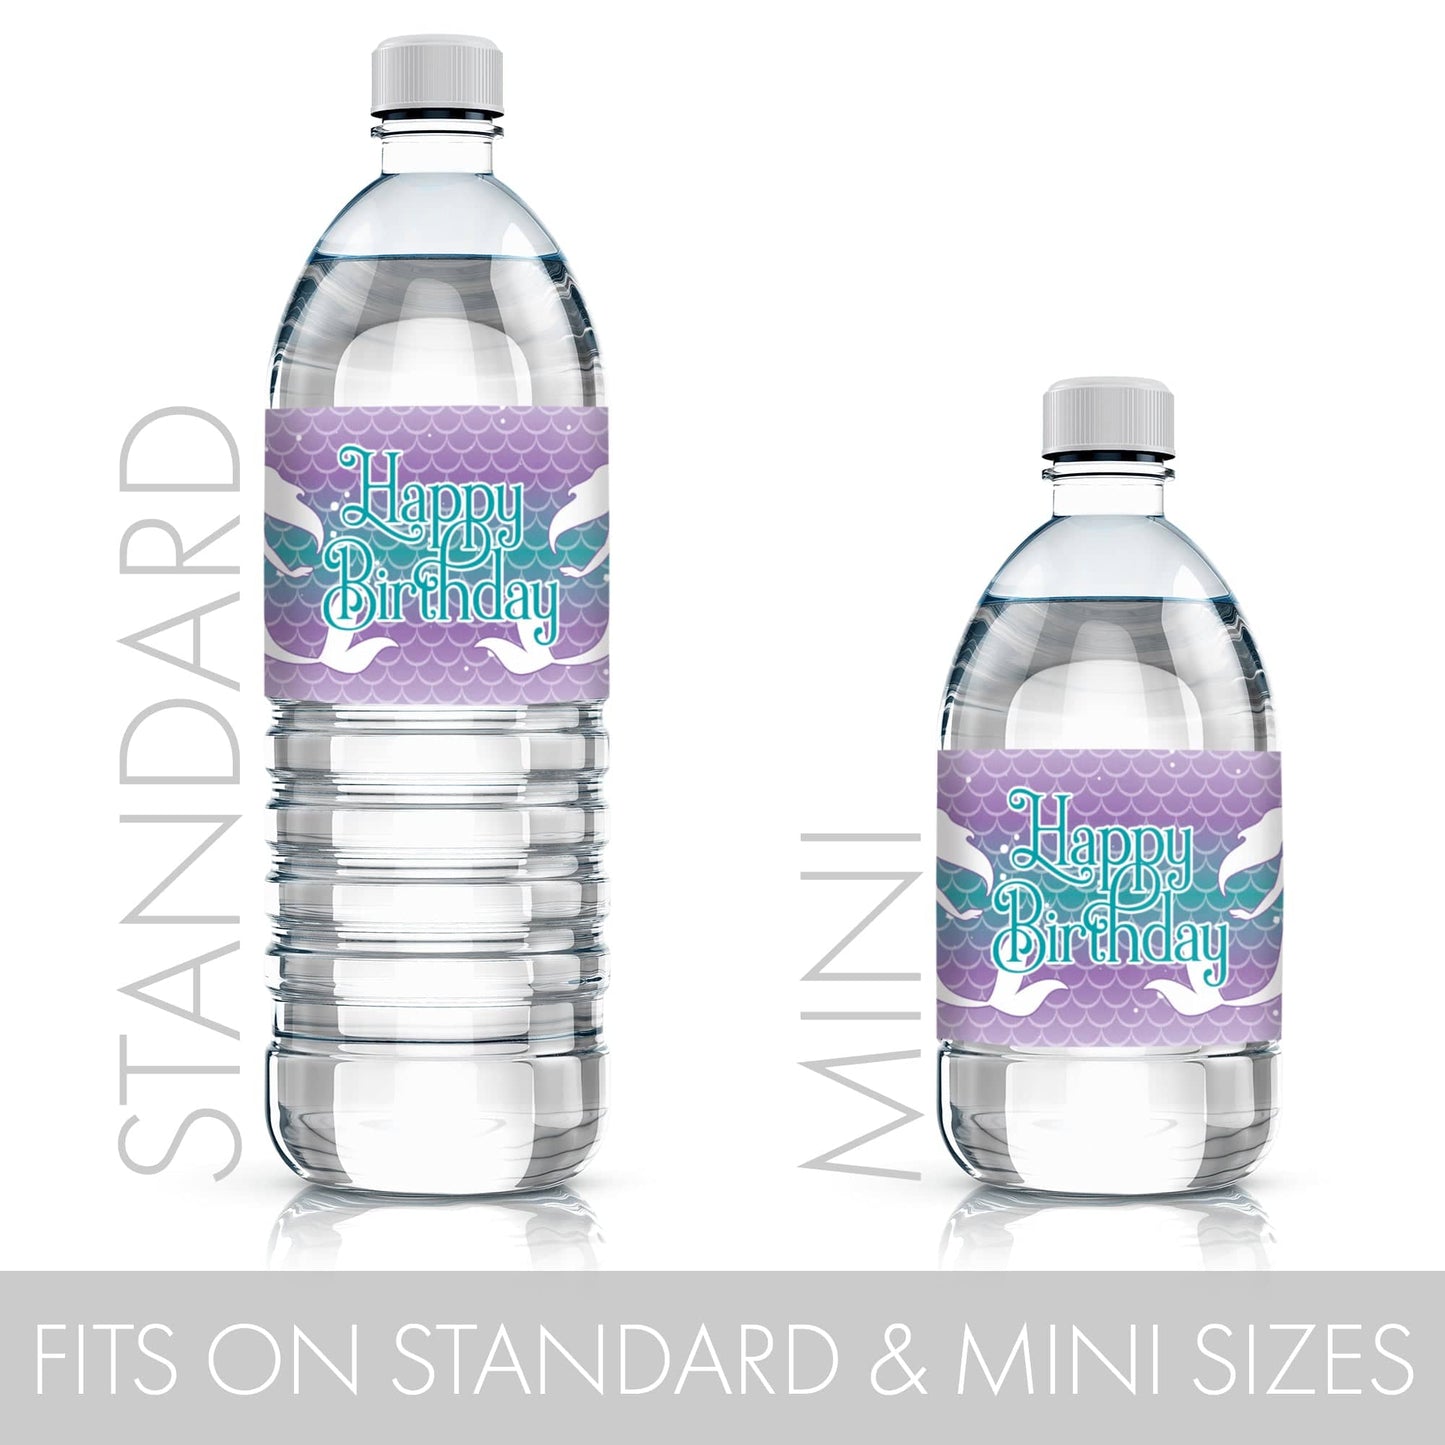 Mermaid Birthday Party Water Bottle Labels - 24 Count